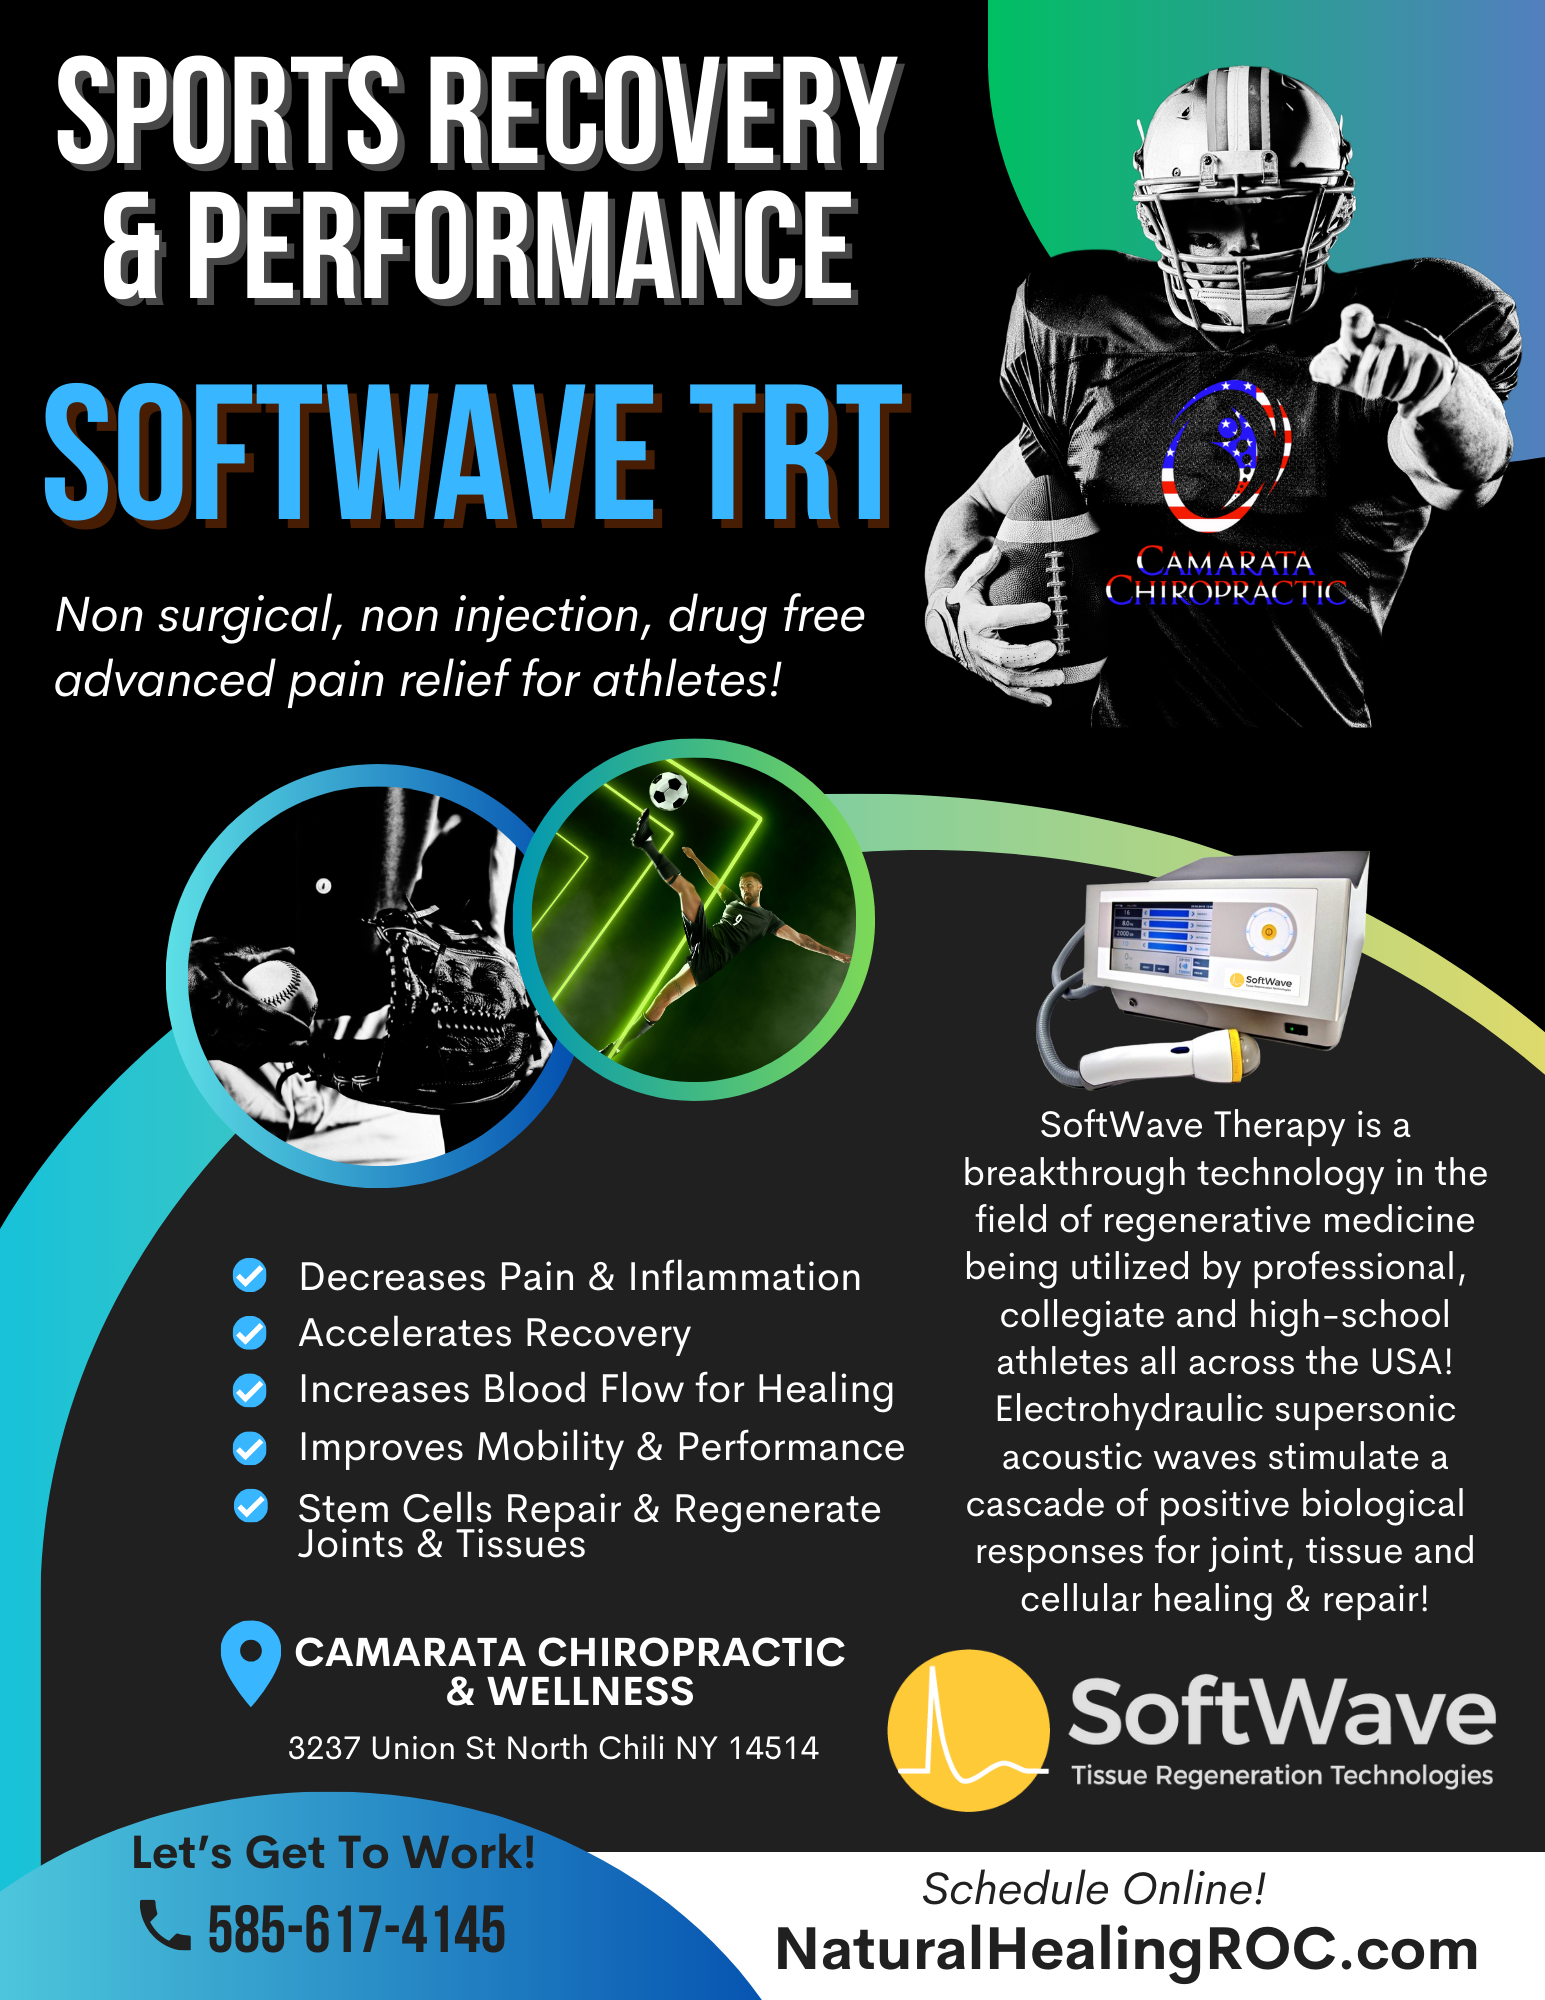 Unleashing Athletic Excellence: The Power of SoftWave TRT at Camarata Chiropractic & Wellness